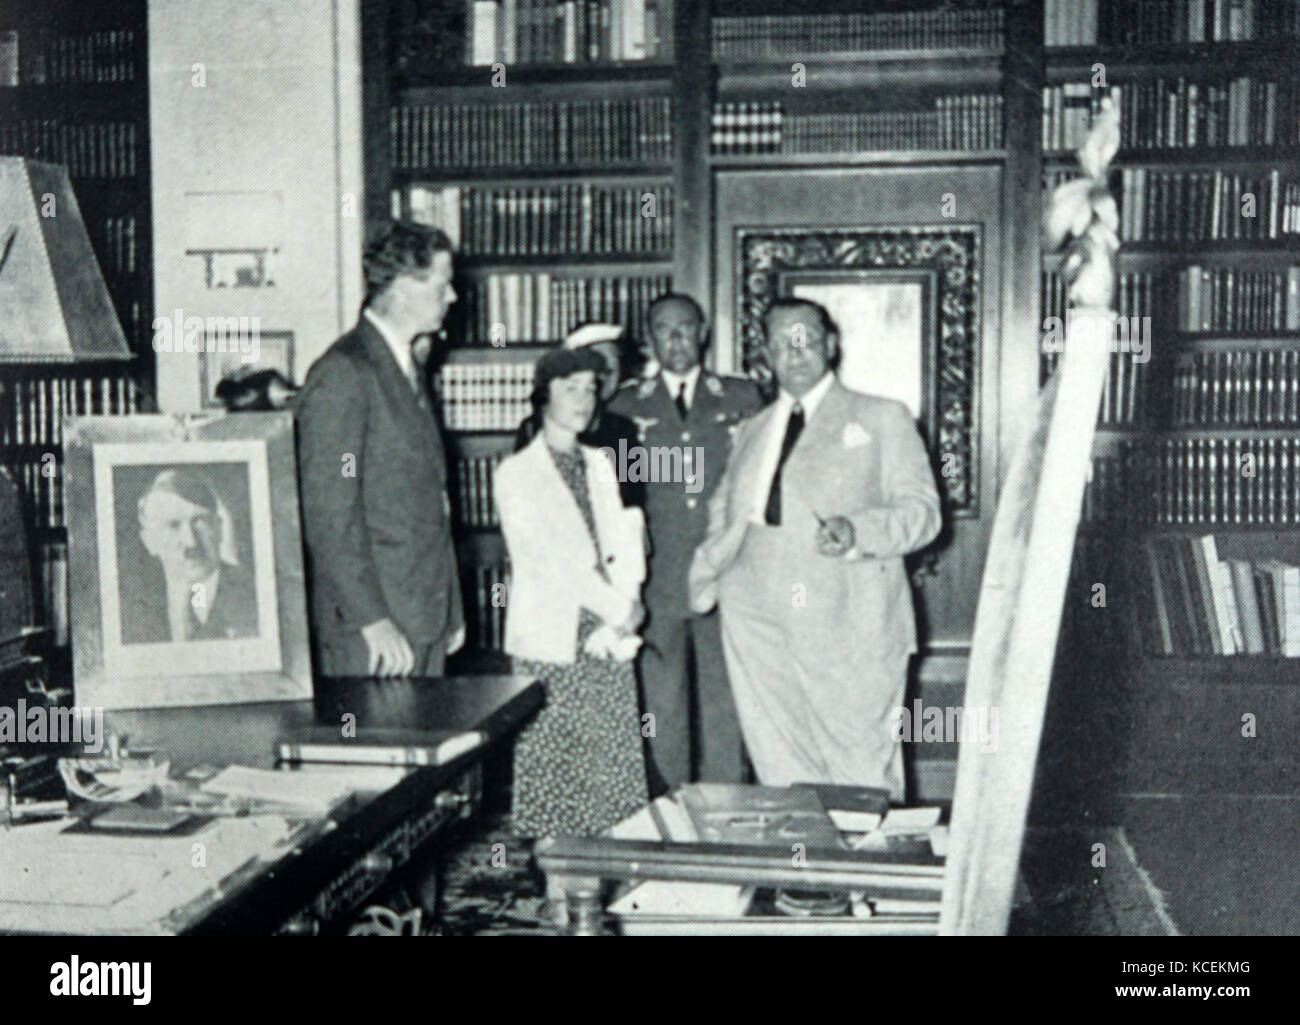 Photograph of Charles Lindbergh (1902-1974) an American aviator, military officer, author, inventor, explorer and environmental activist, visiting the office of Hermann Göring. Dated 20th Century Stock Photo